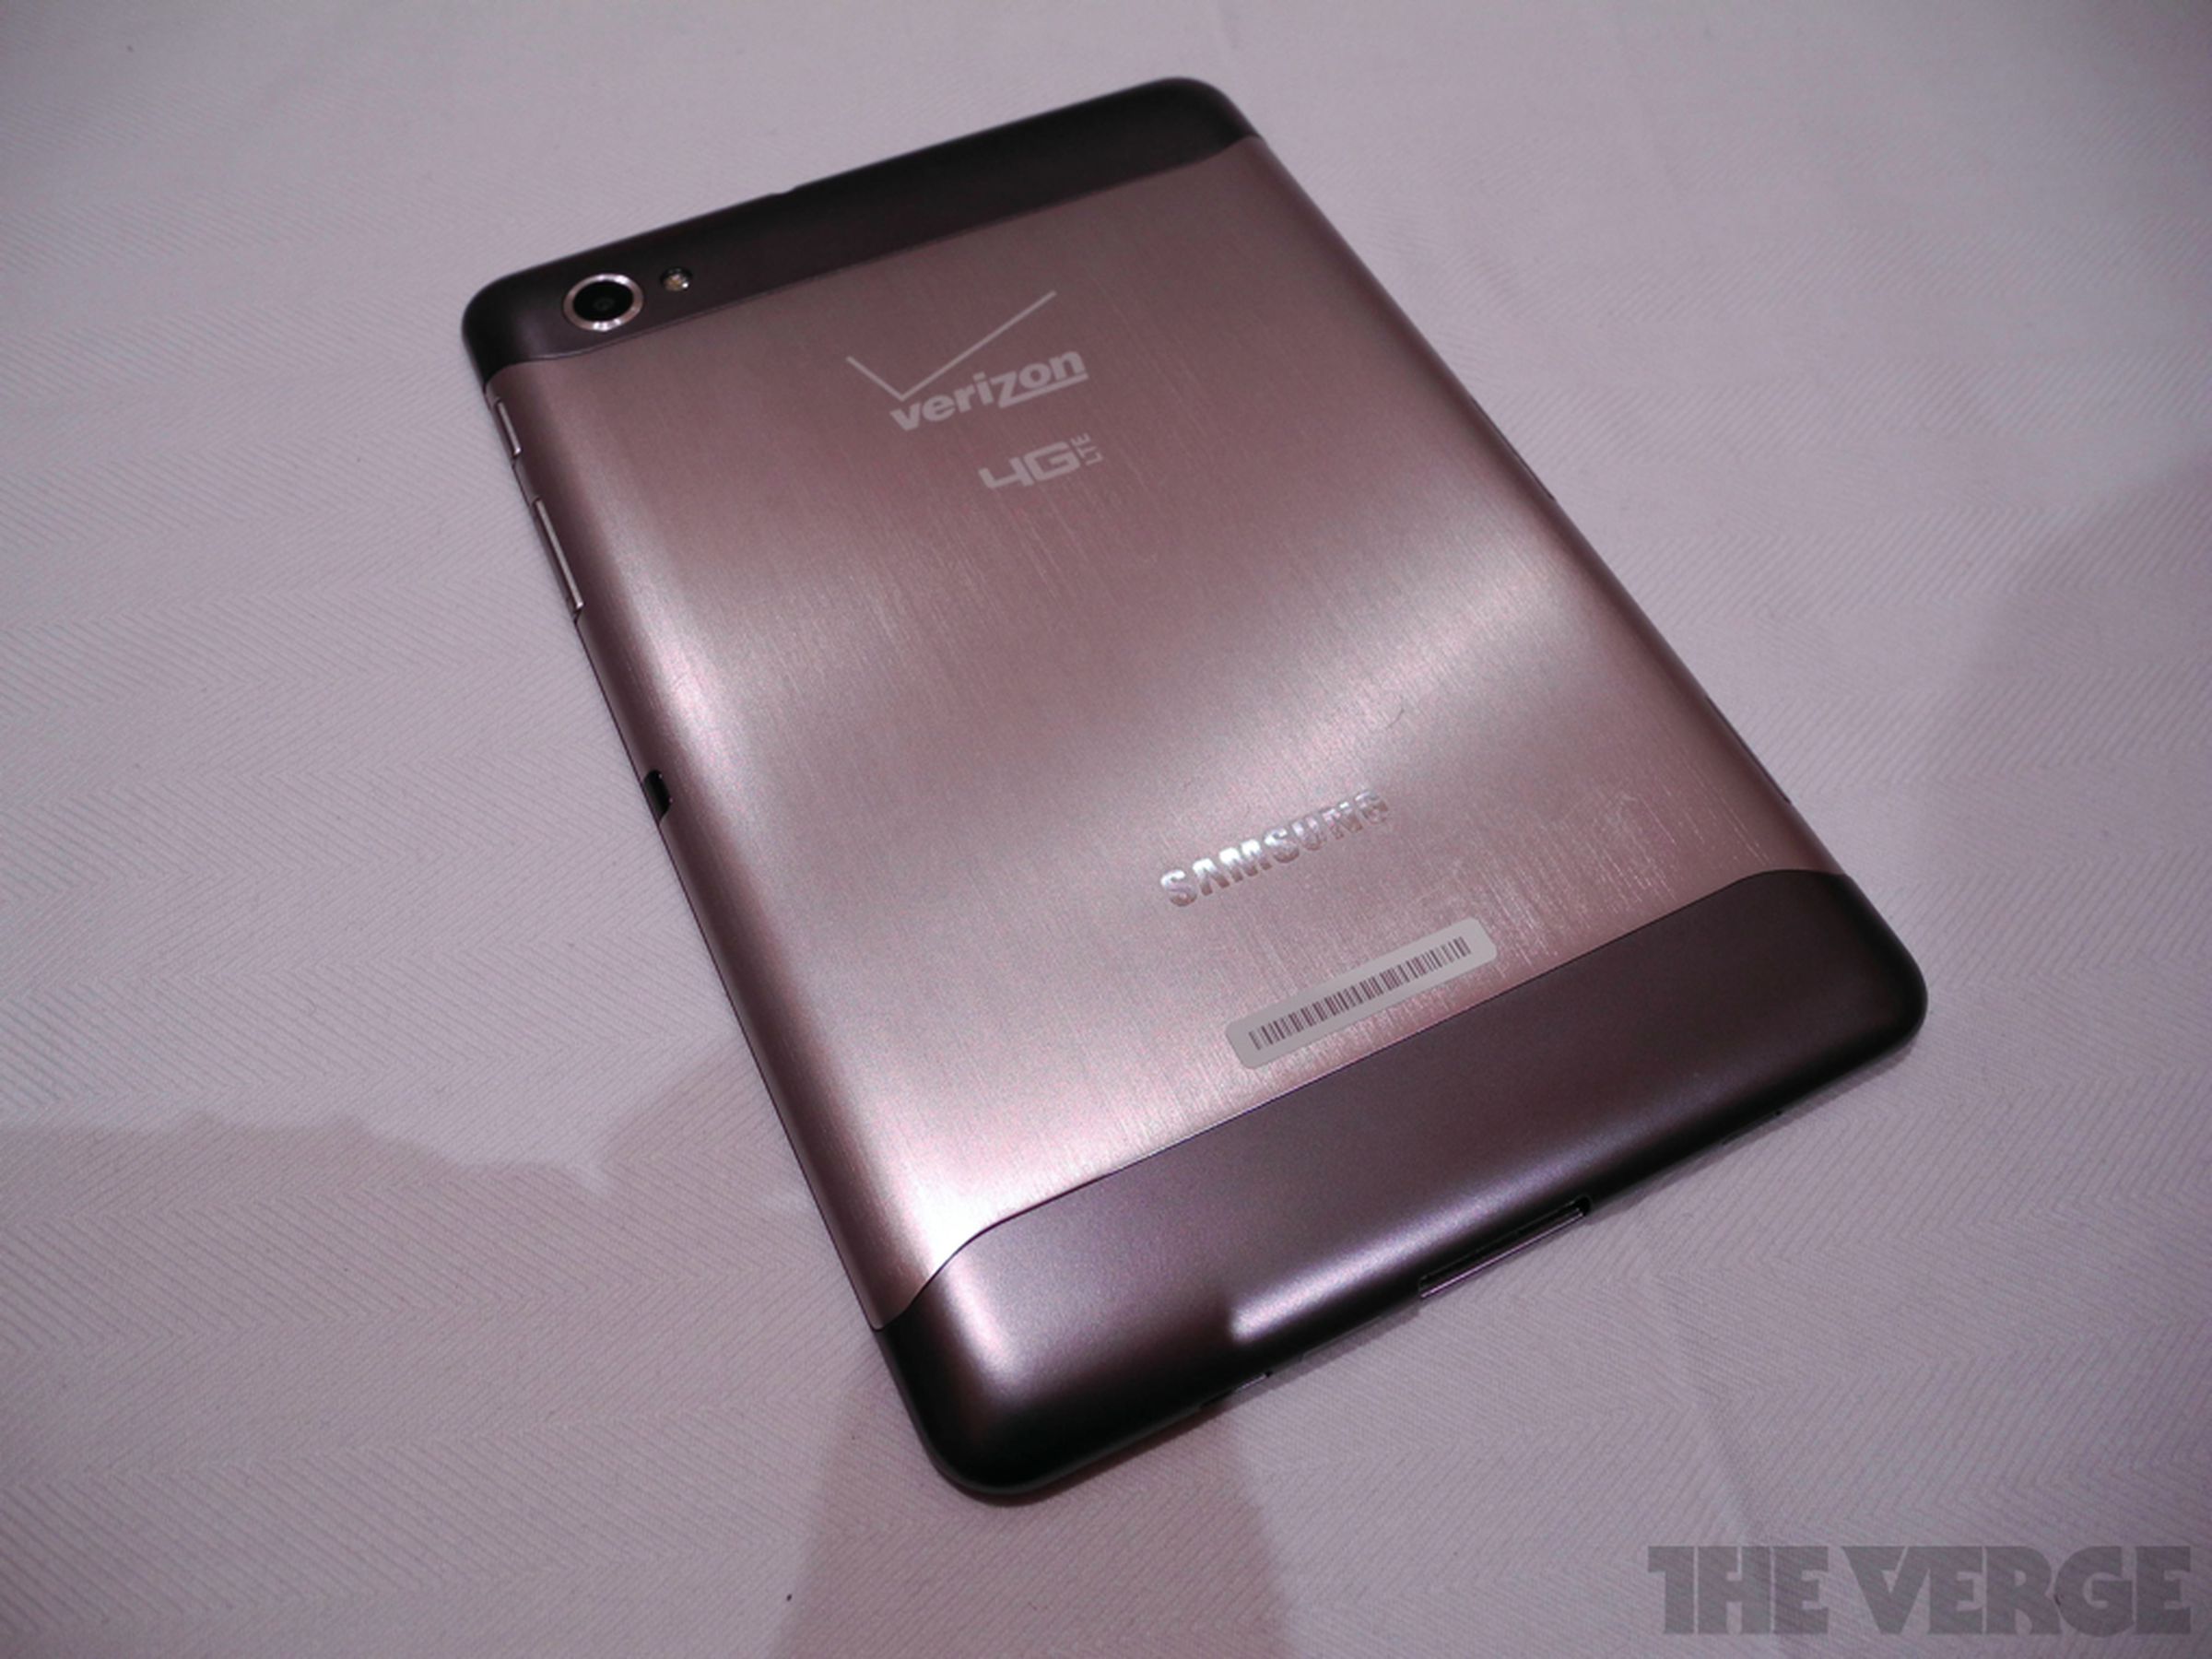 Samsung Galaxy Tab 7.7 for Verizon hands-on pictures